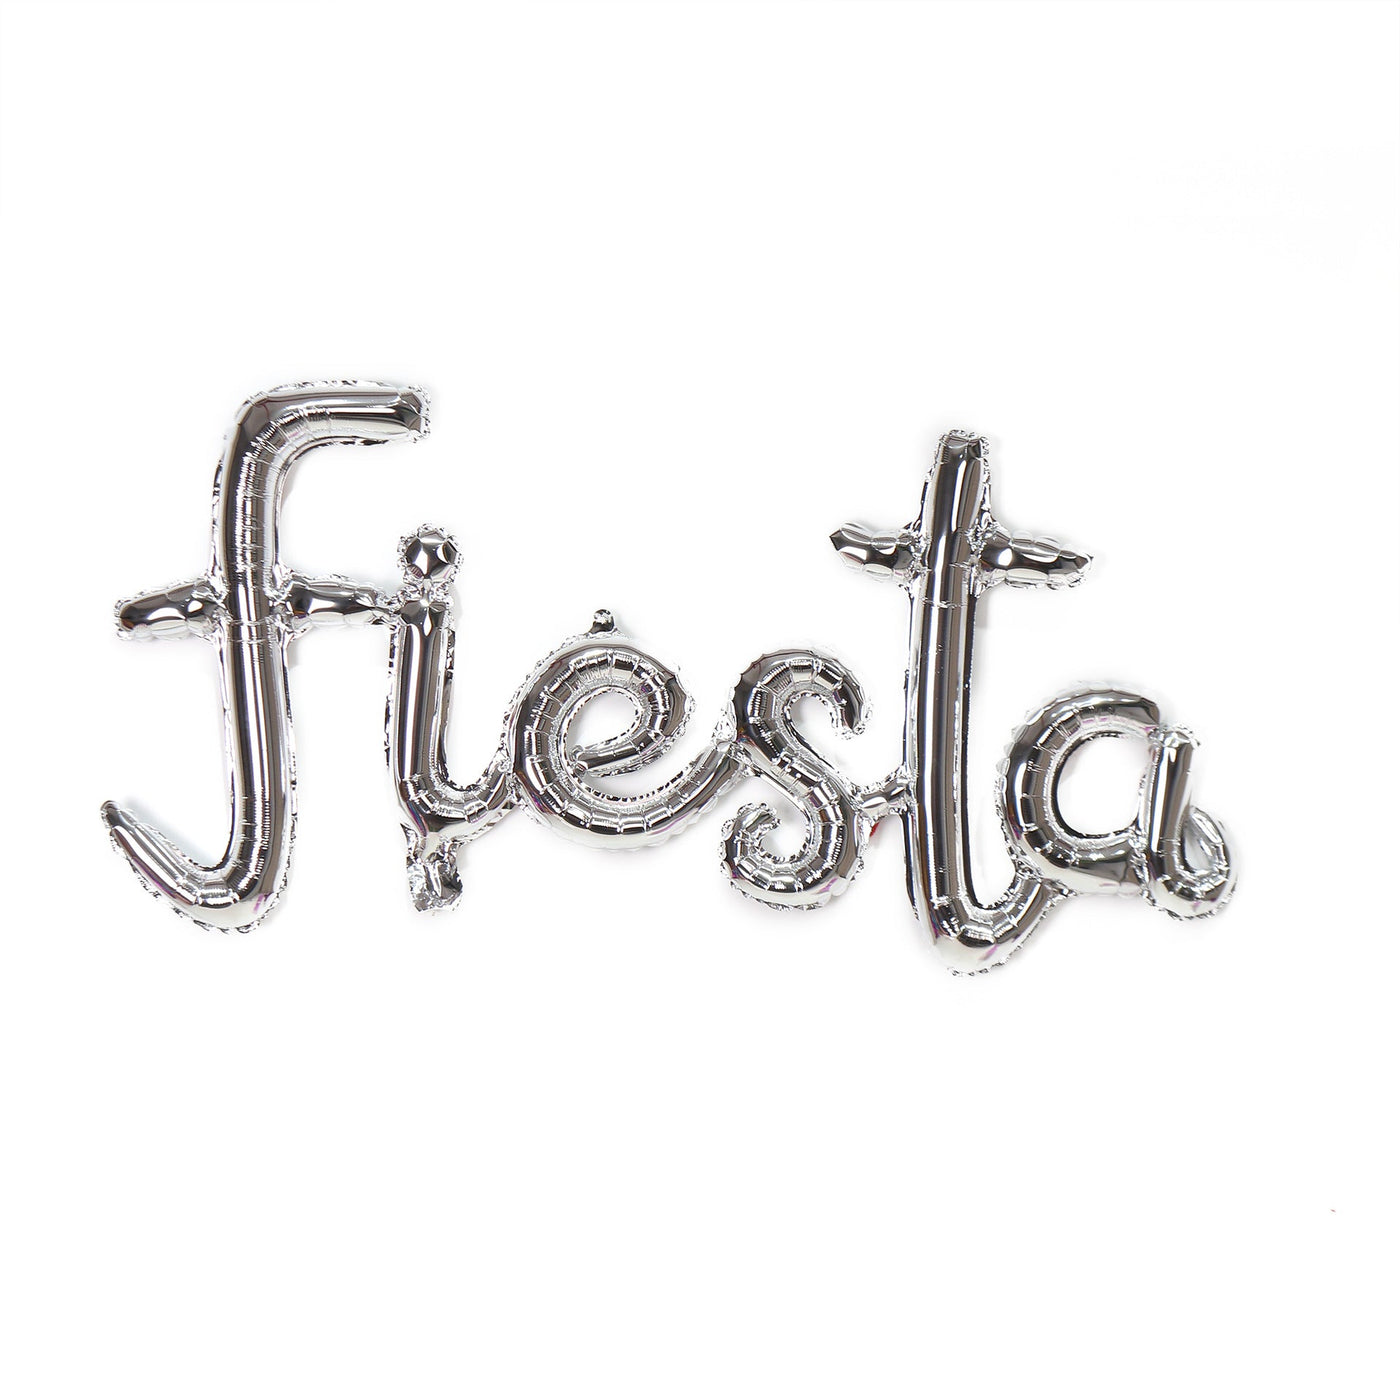 Fiesta Silver Air Filled Balloon Banner - JJ's Party House